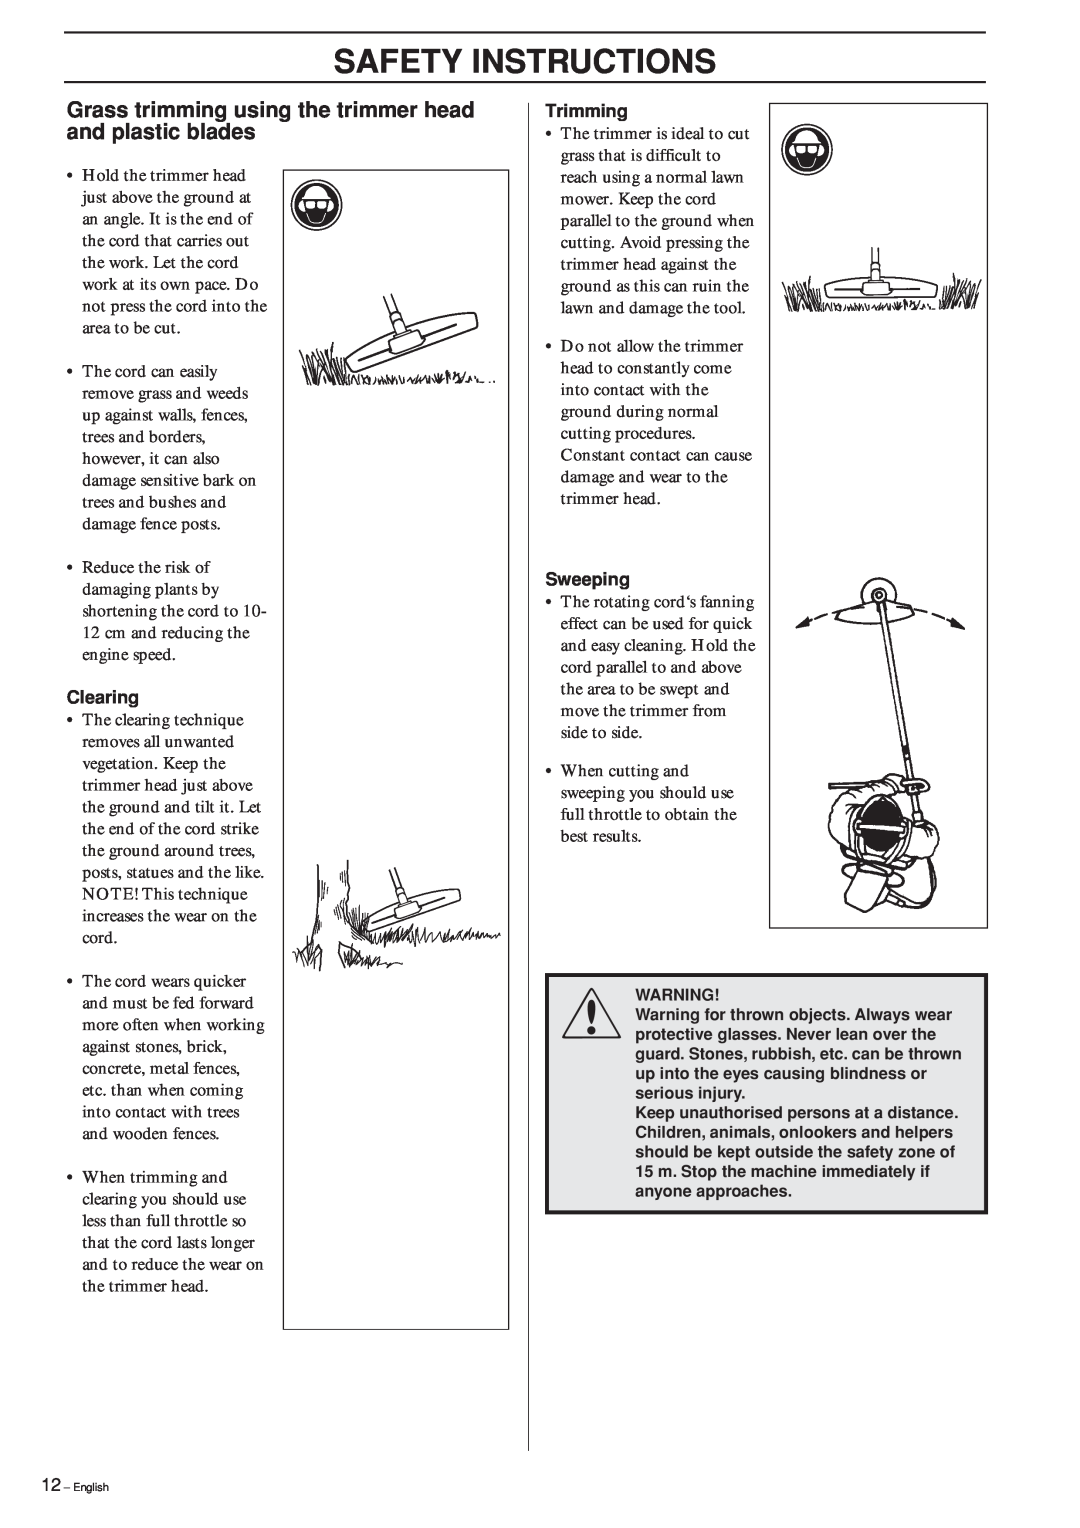 Husqvarna 240RBD manual Safety Instructions, Clearing, Trimming, Sweeping 